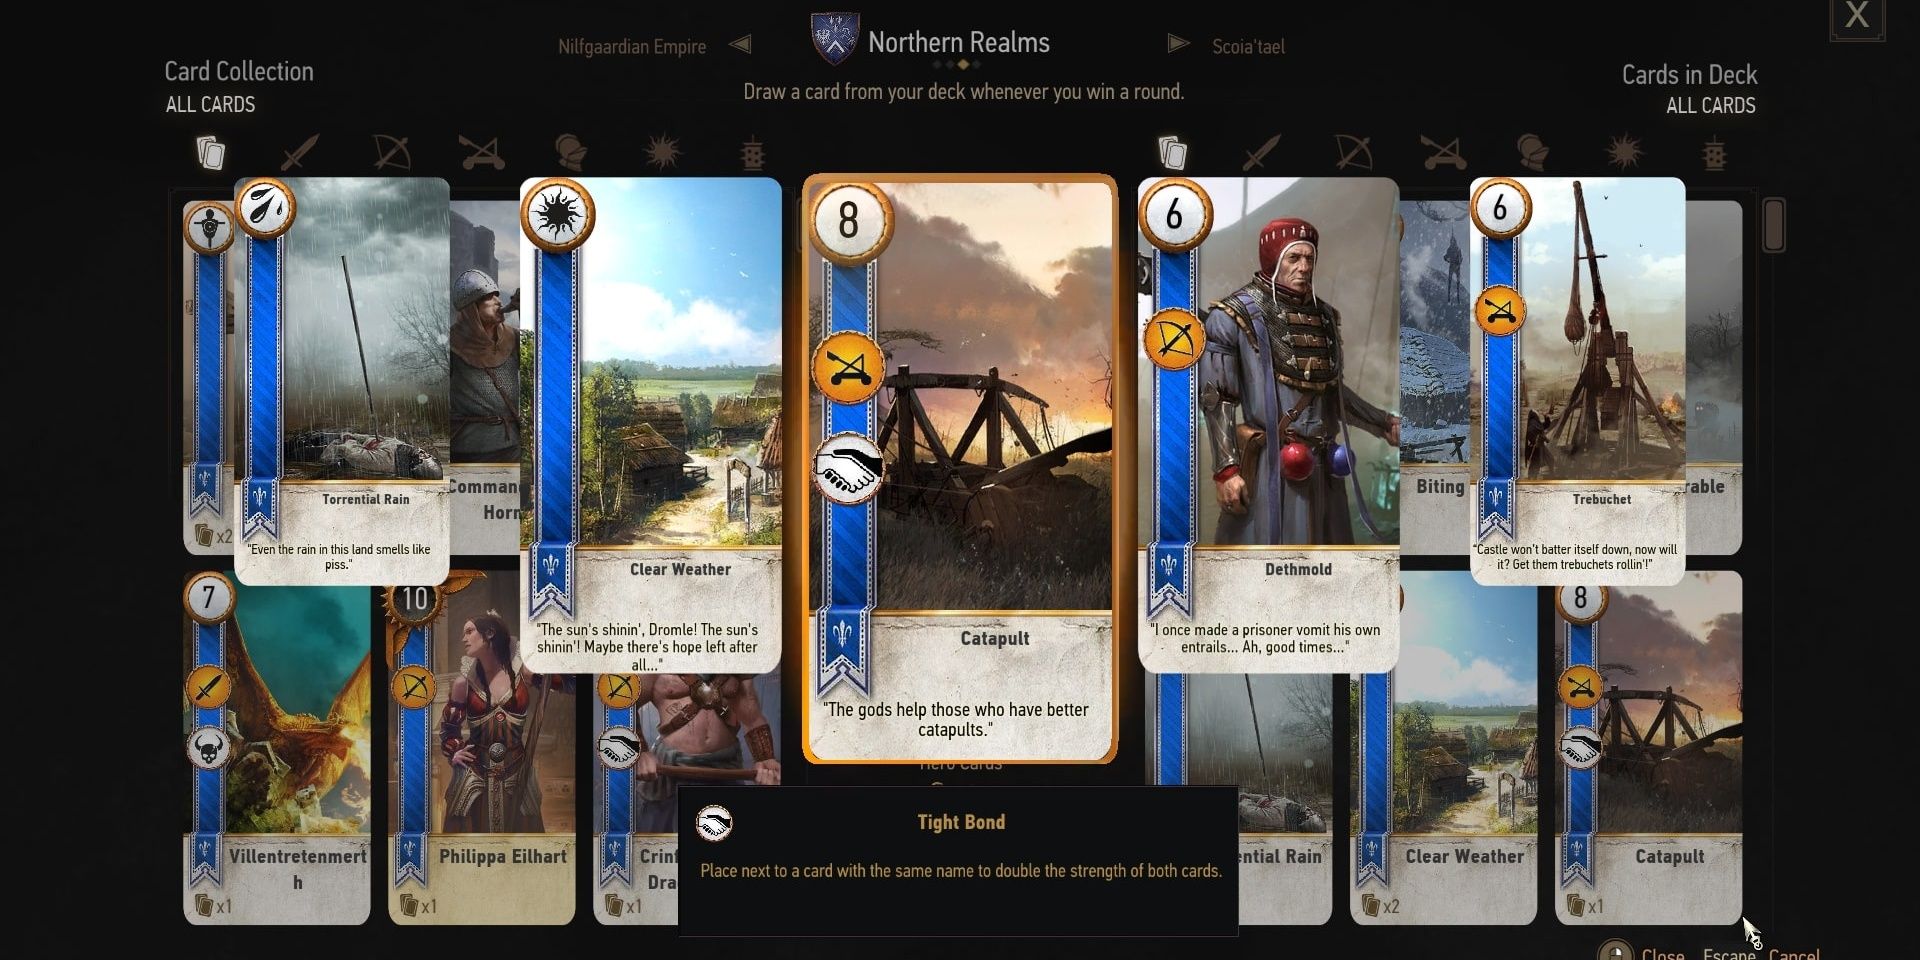 A Catapult Gwent Card in The Witcher 3